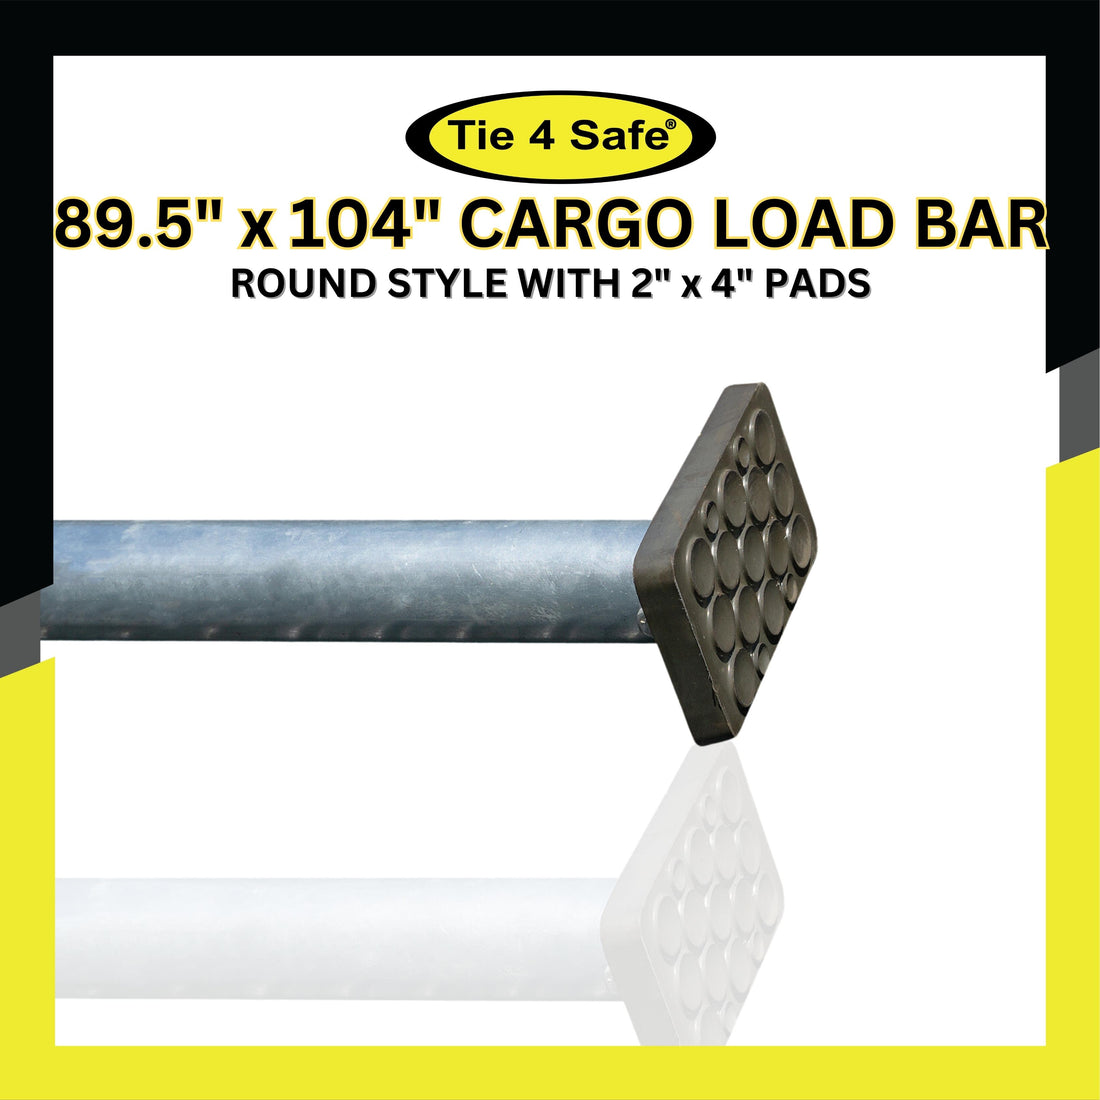 Adjustable Tube Cargo Bar With 2" x 4" Pads